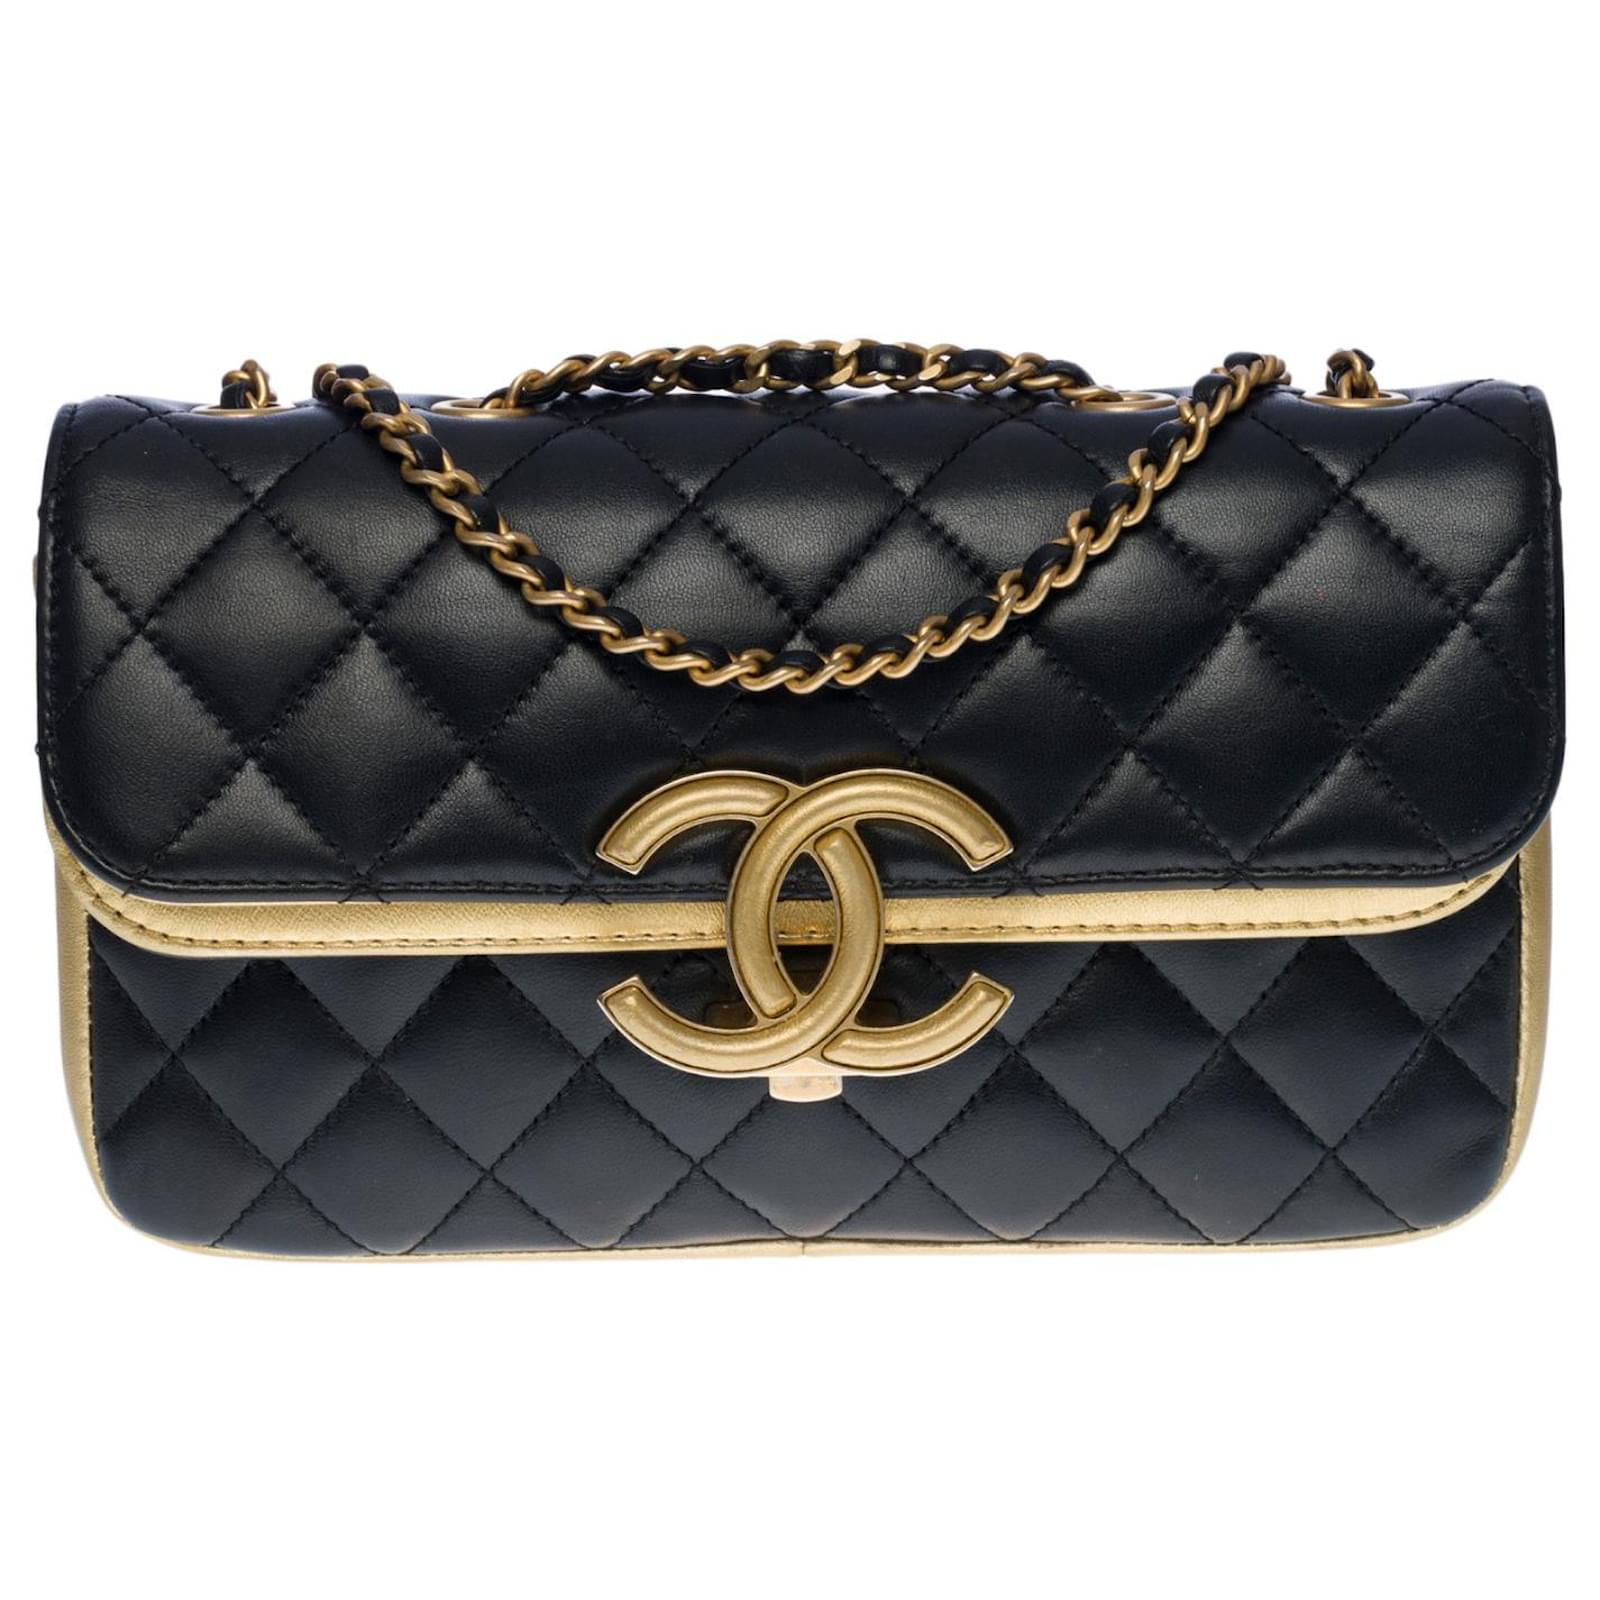 Timeless Sublime and Rare Chanel Classique lined flap handbag in